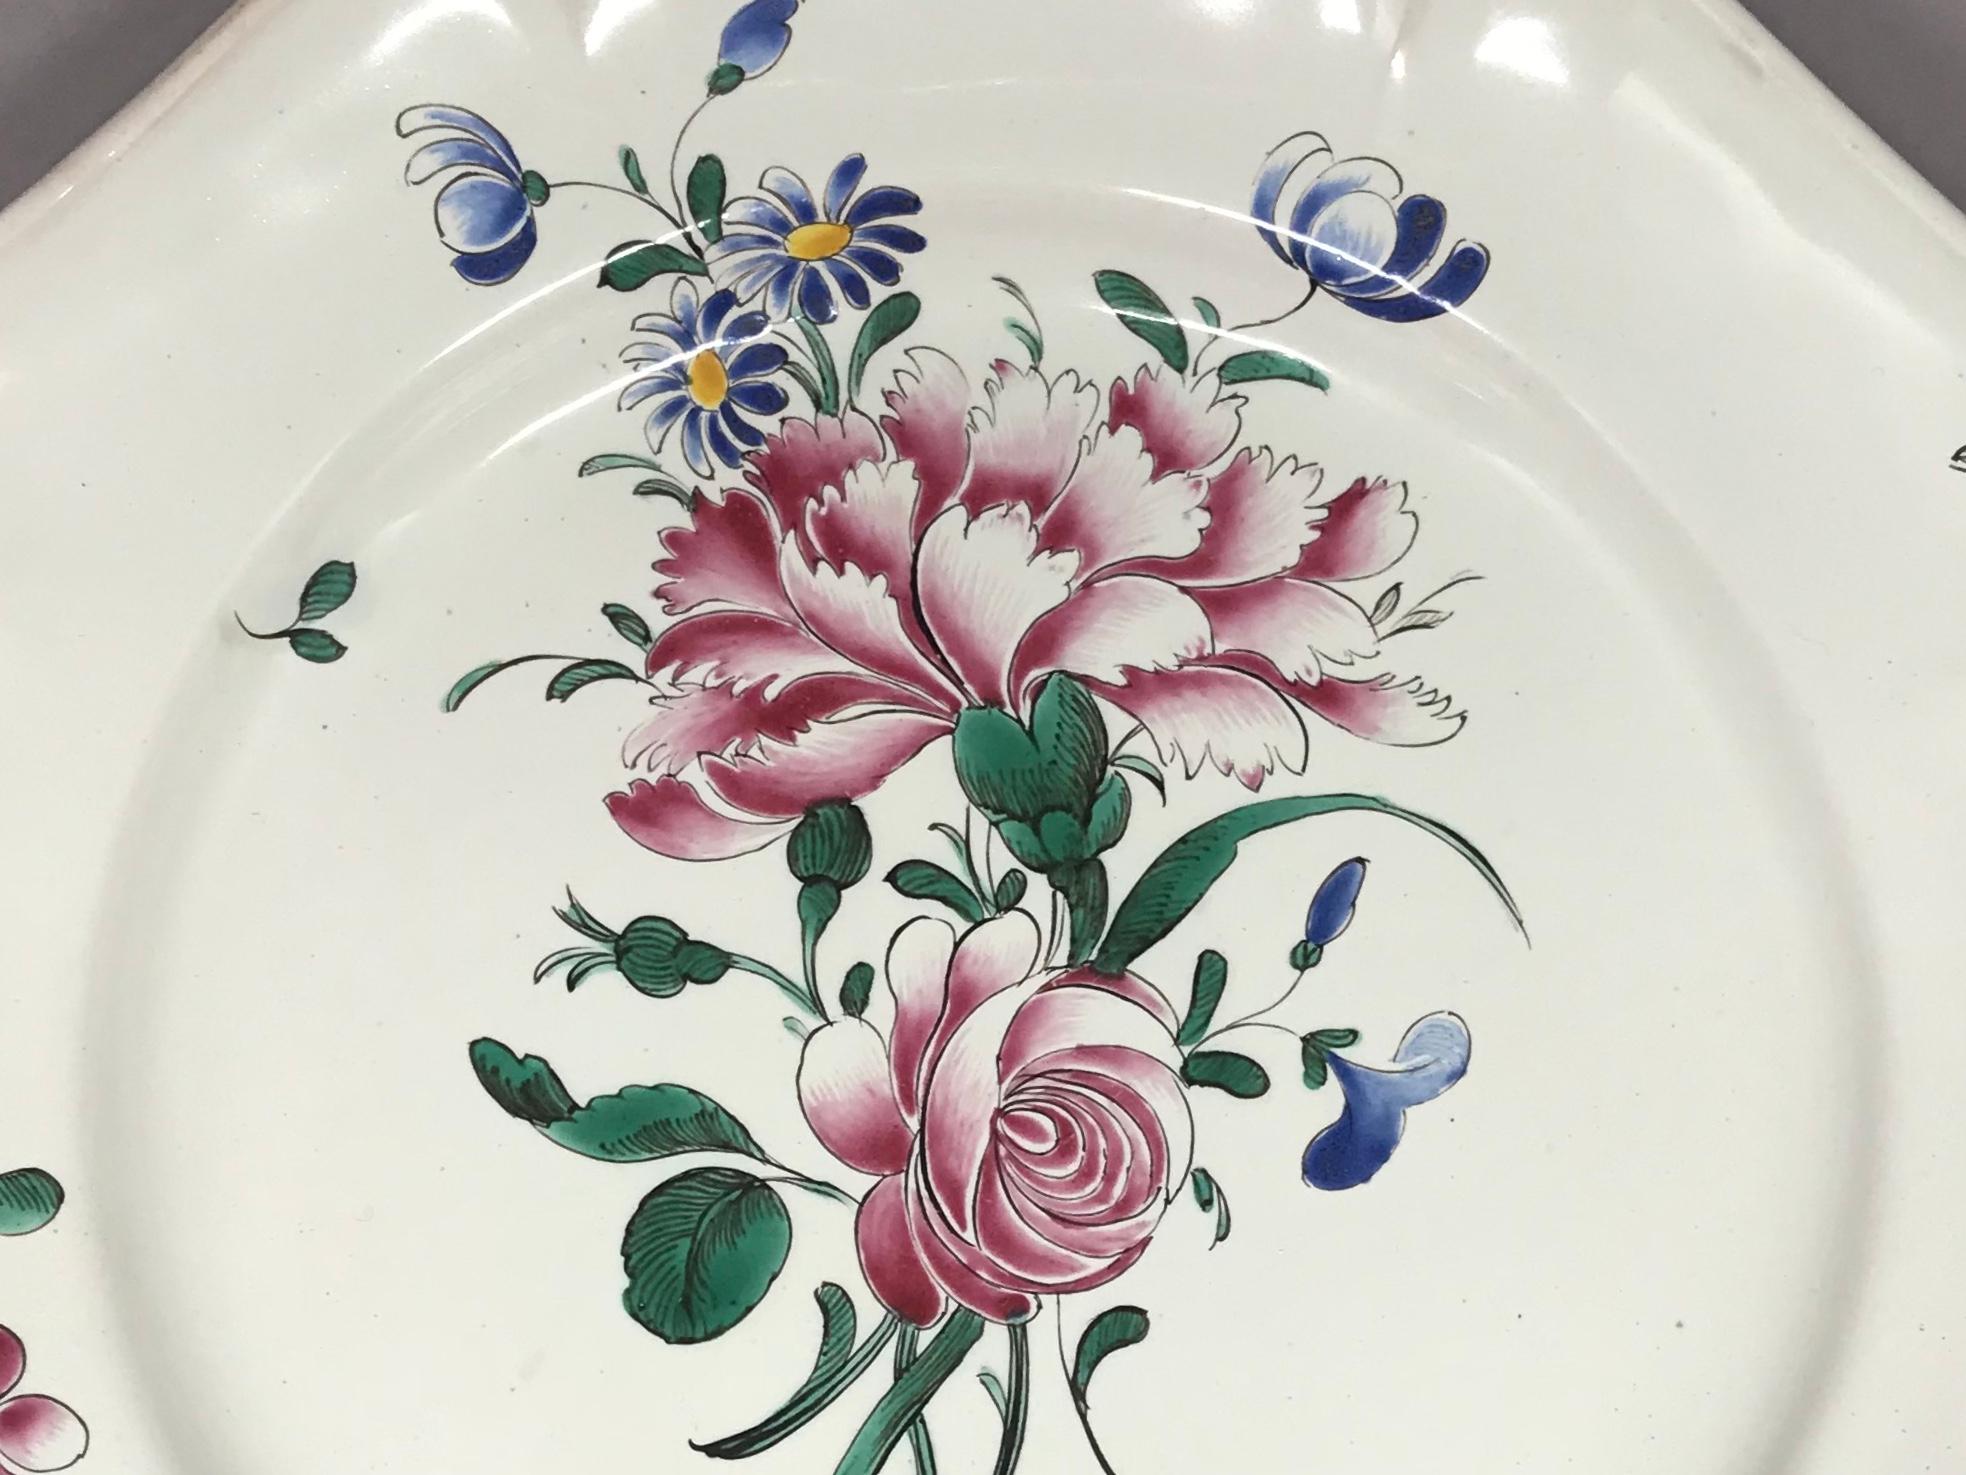 Strasbourg faience floral plate. Antique faience plate with large floral bouquet of pinks and blues with lobed rim and further floral sprays; with blue underglaze markings for Hannong Factory, France, circa 1750. 
Dimension: 9